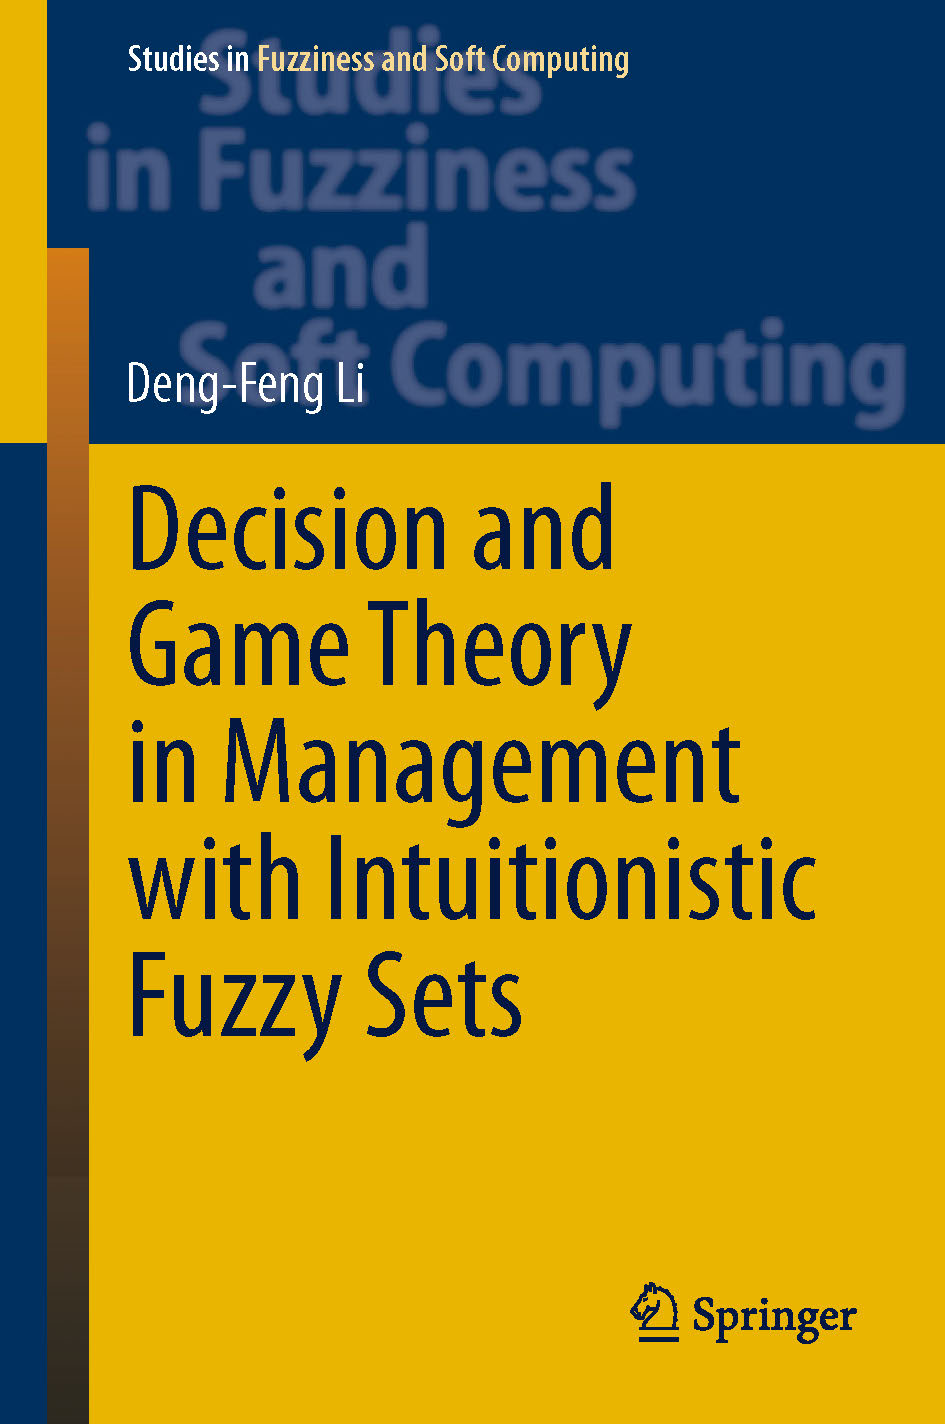 Pages from Decision and Game Theory in Management With Intuitionistic Fuzzy Sets.jpg